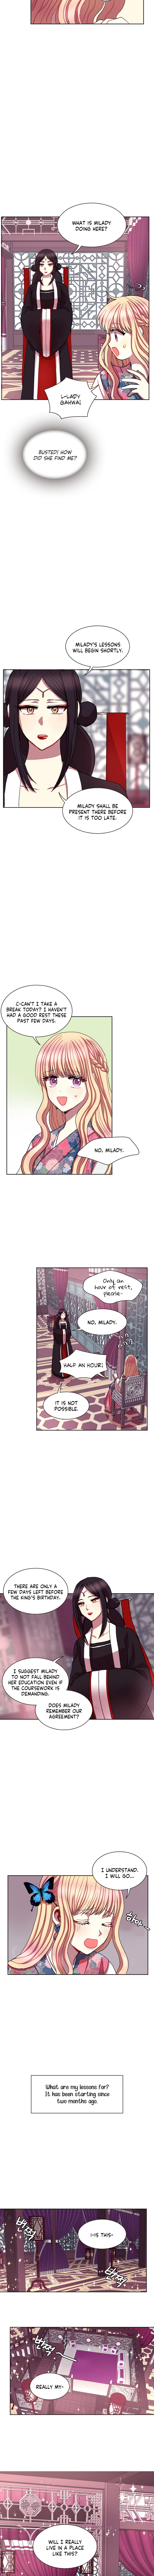 Hang Ah, The Moon's Child - Page 2